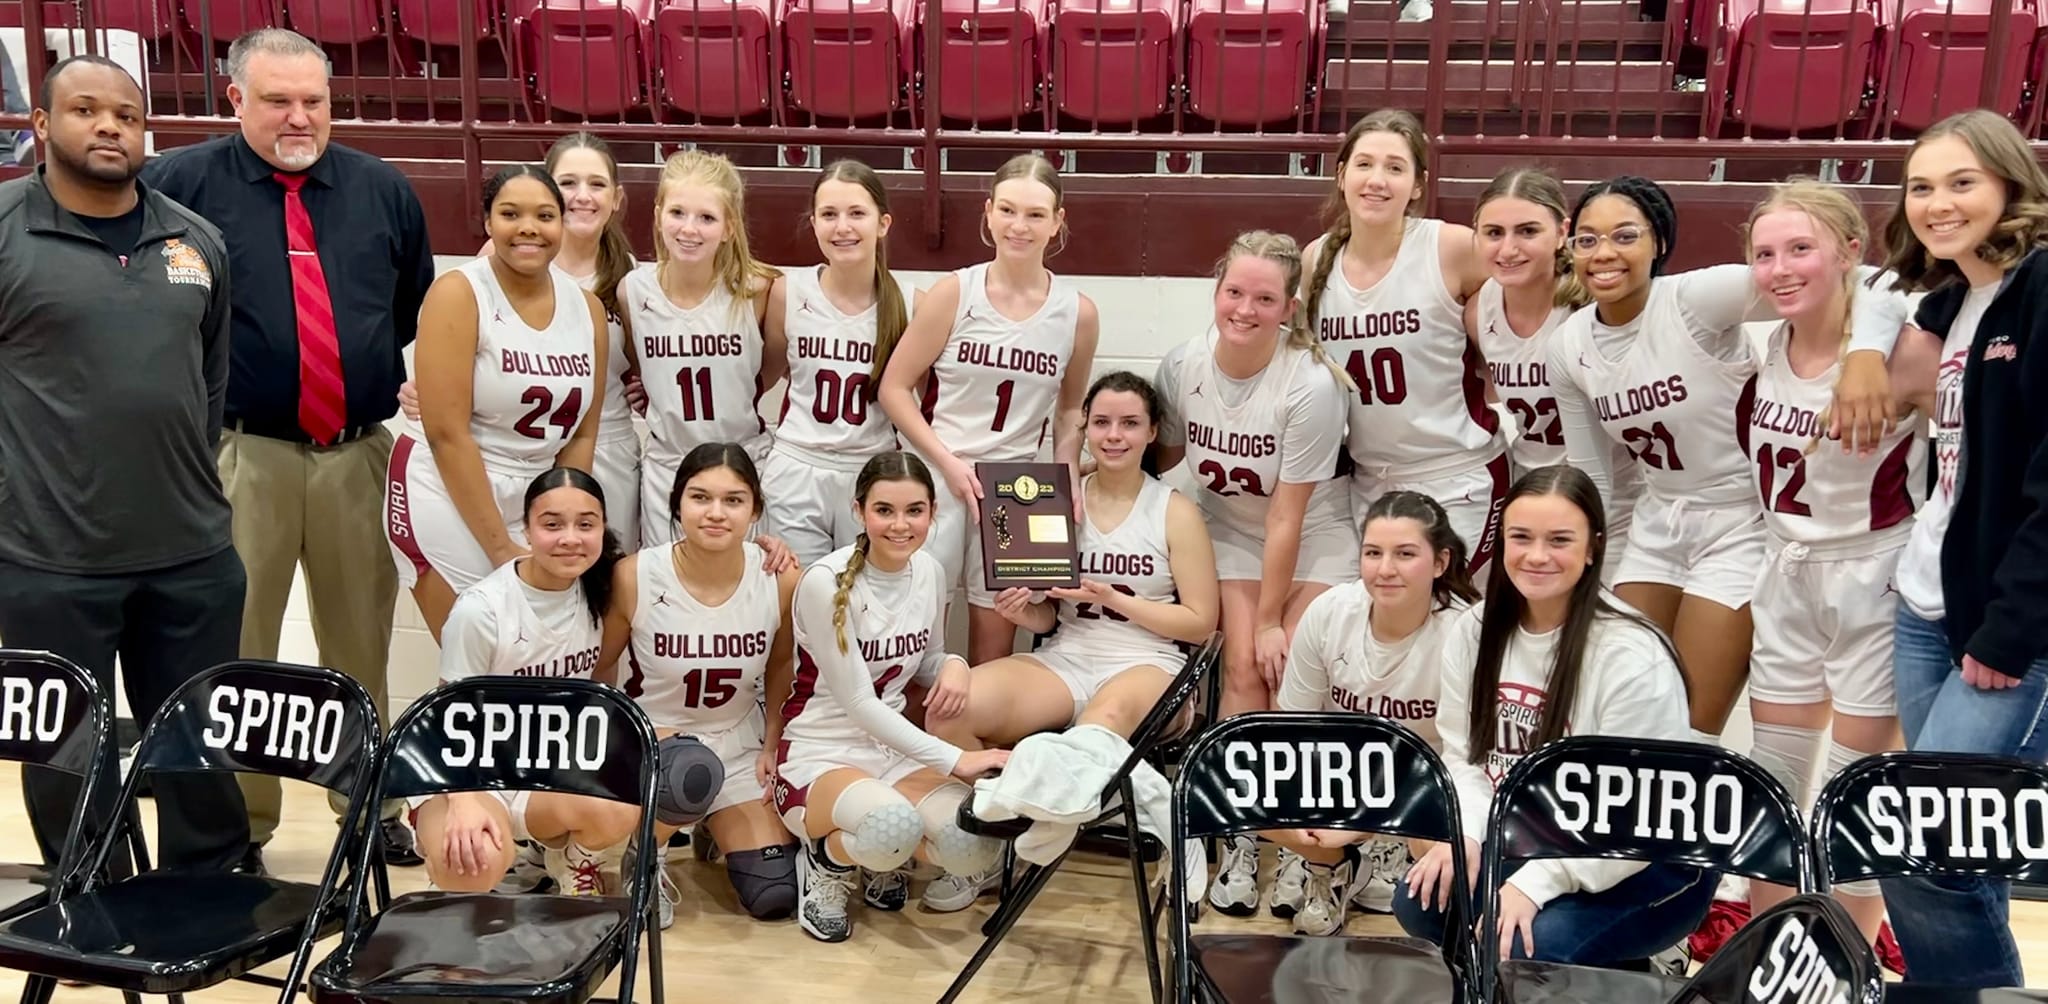 Girl's basketball team poses with trophy in front of bleachers